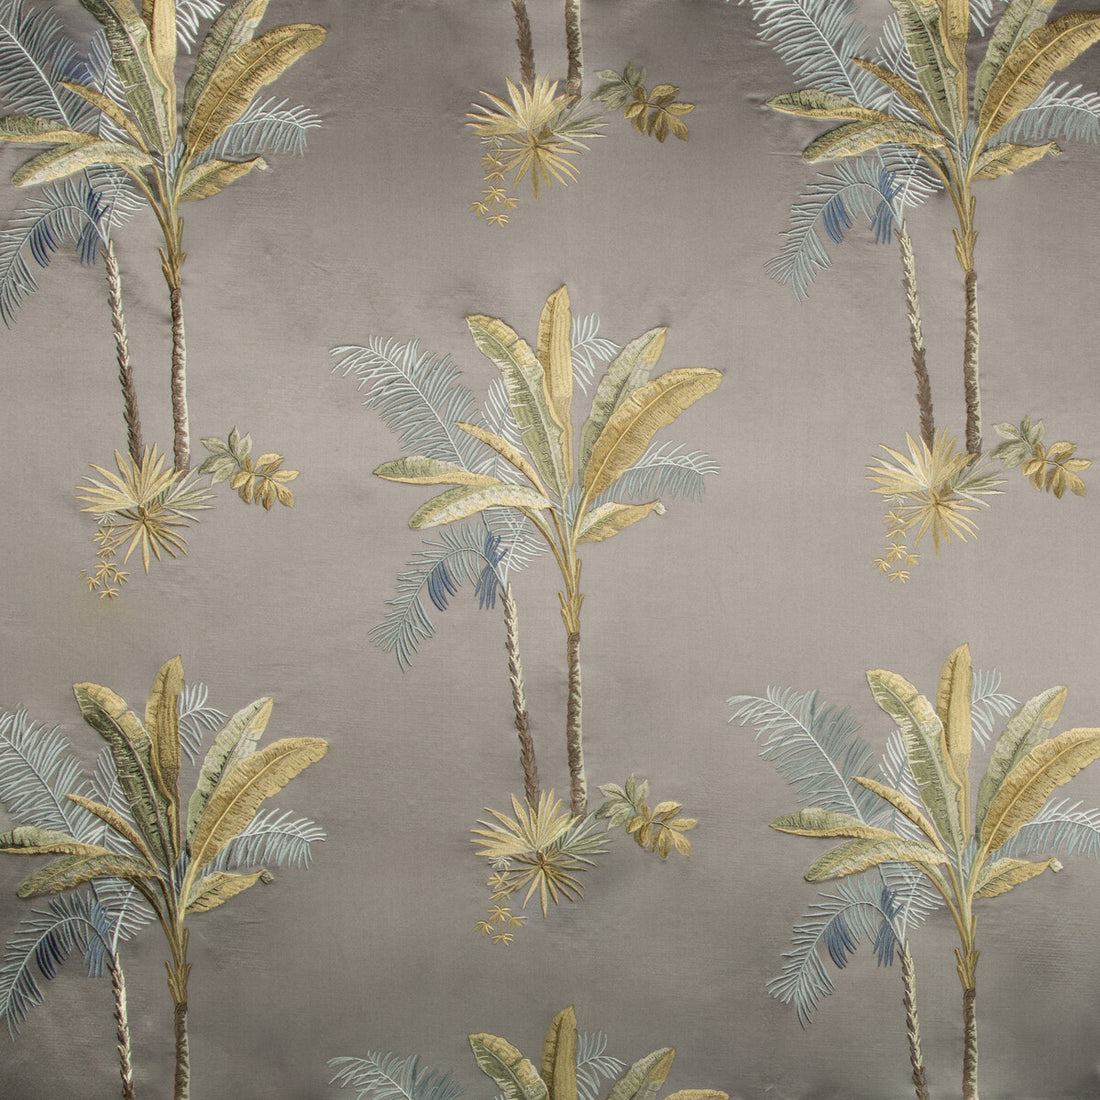 La Wela fabric in slate color - pattern 35334.11.0 - by Kravet Couture